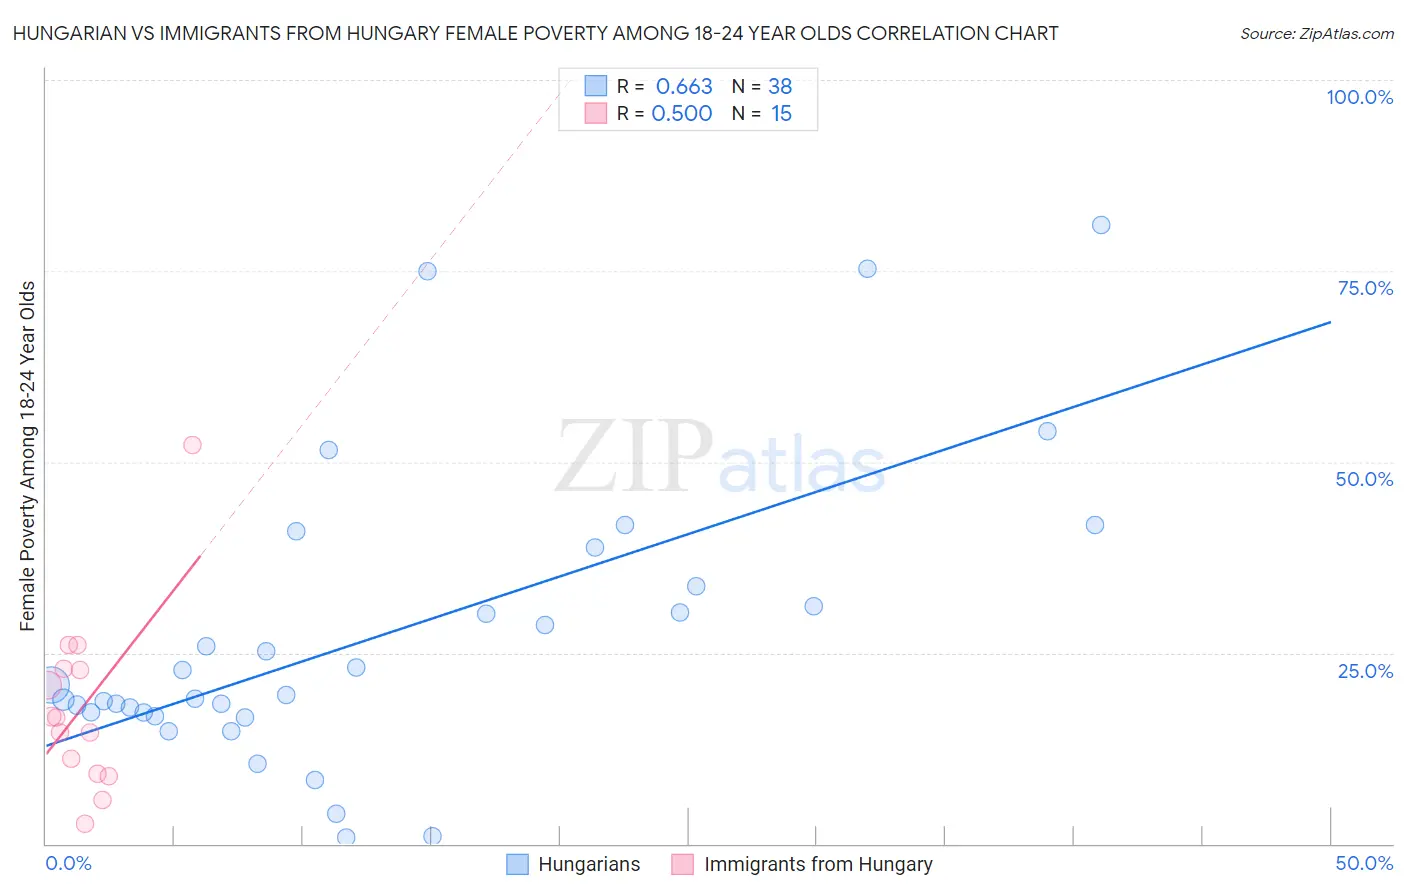 Hungarian vs Immigrants from Hungary Female Poverty Among 18-24 Year Olds